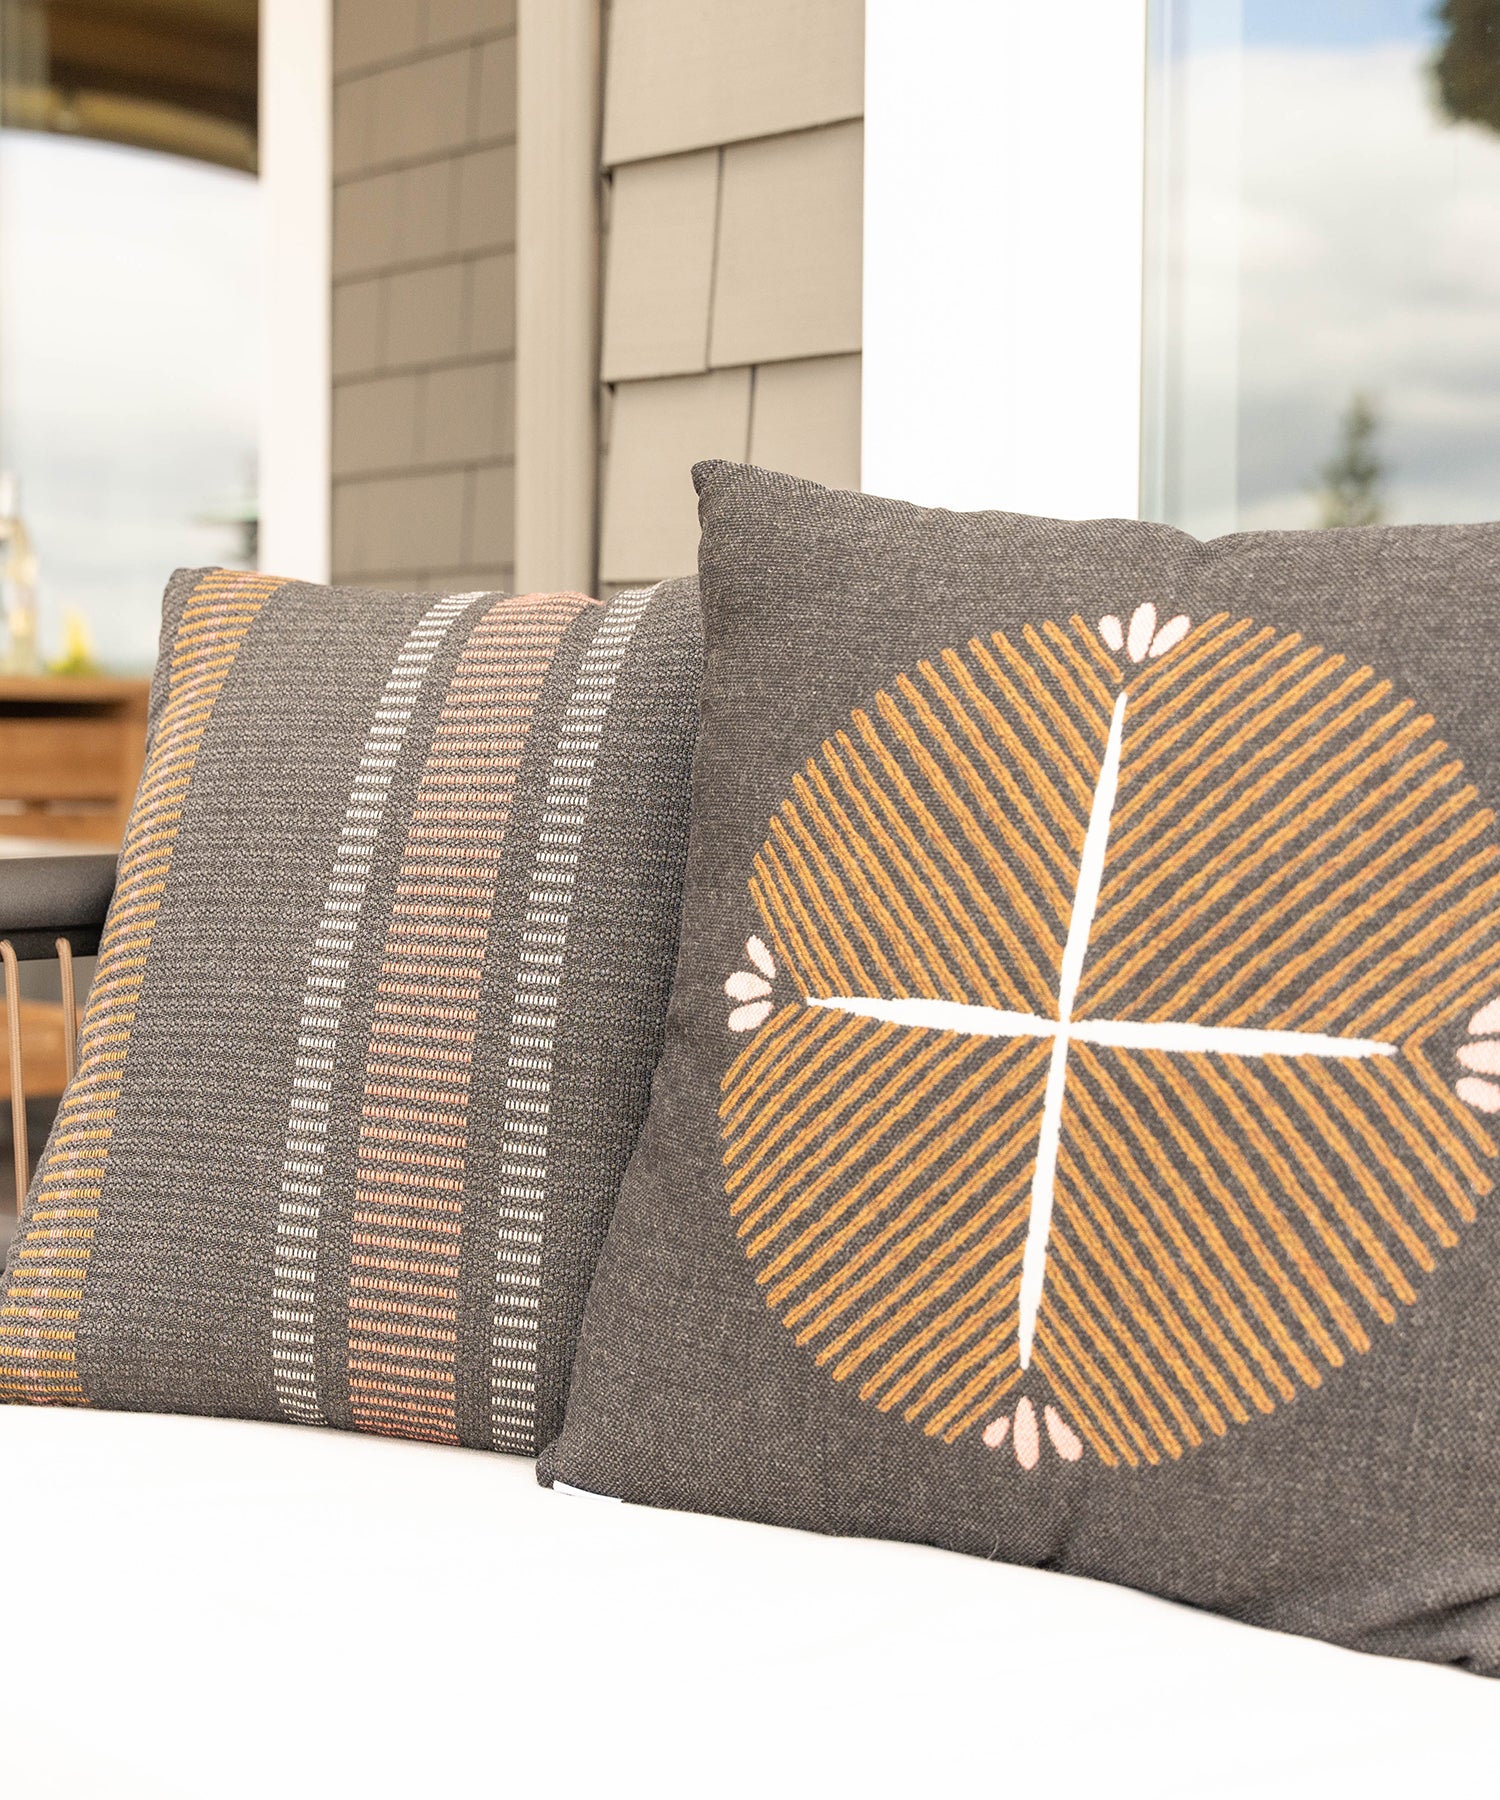 Close-up of two grey and orange outdoor throw pillows